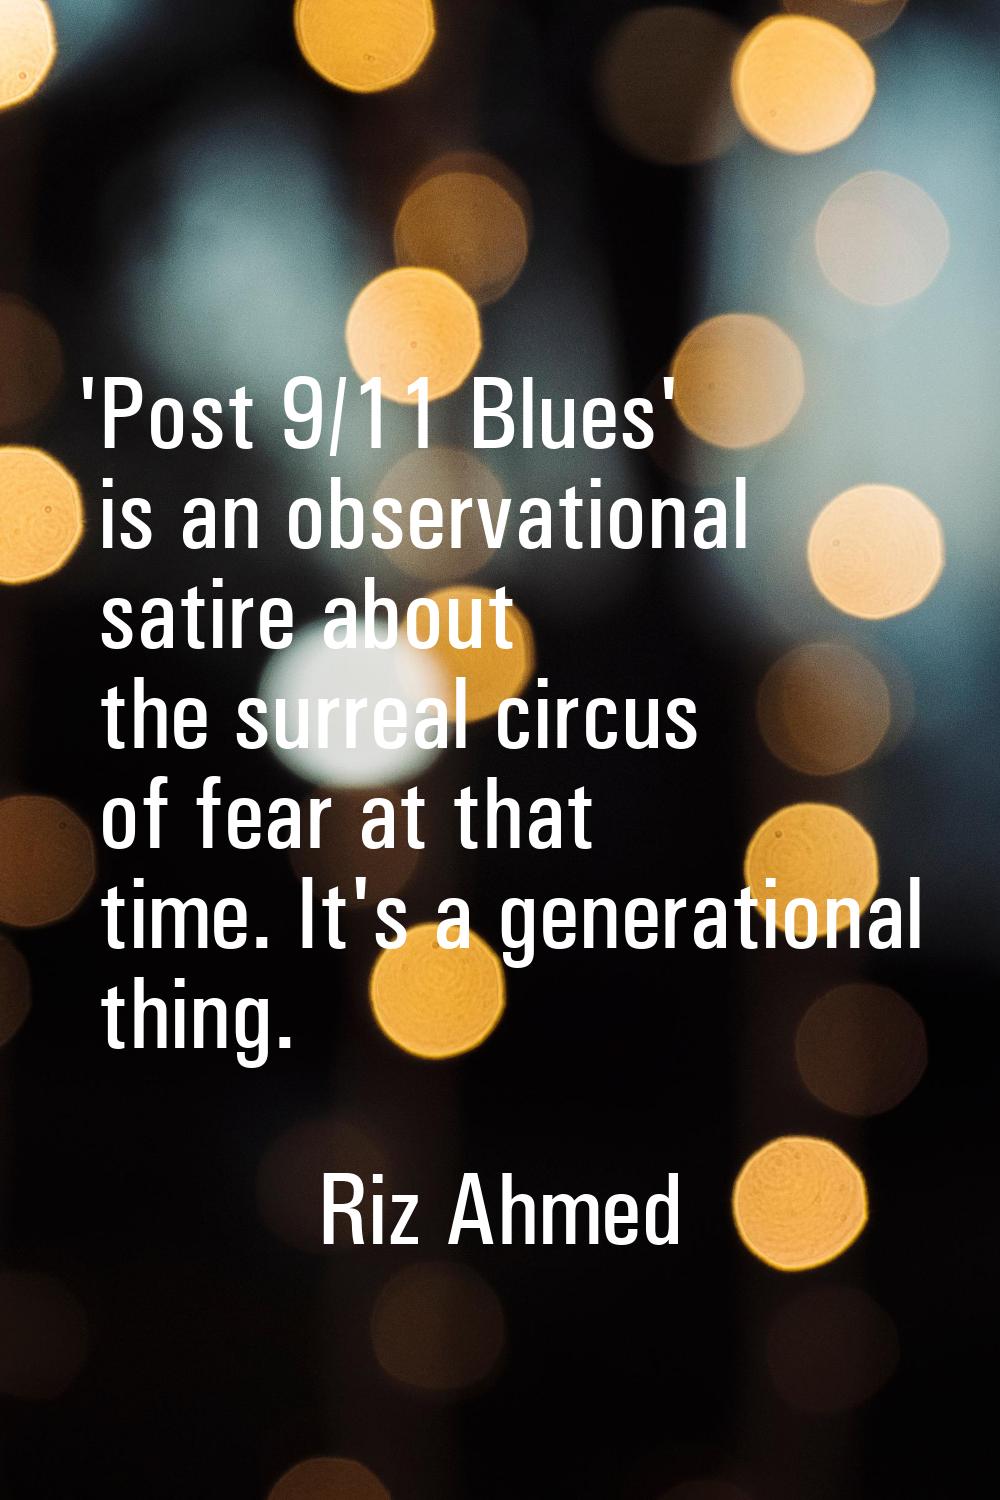 'Post 9/11 Blues' is an observational satire about the surreal circus of fear at that time. It's a 